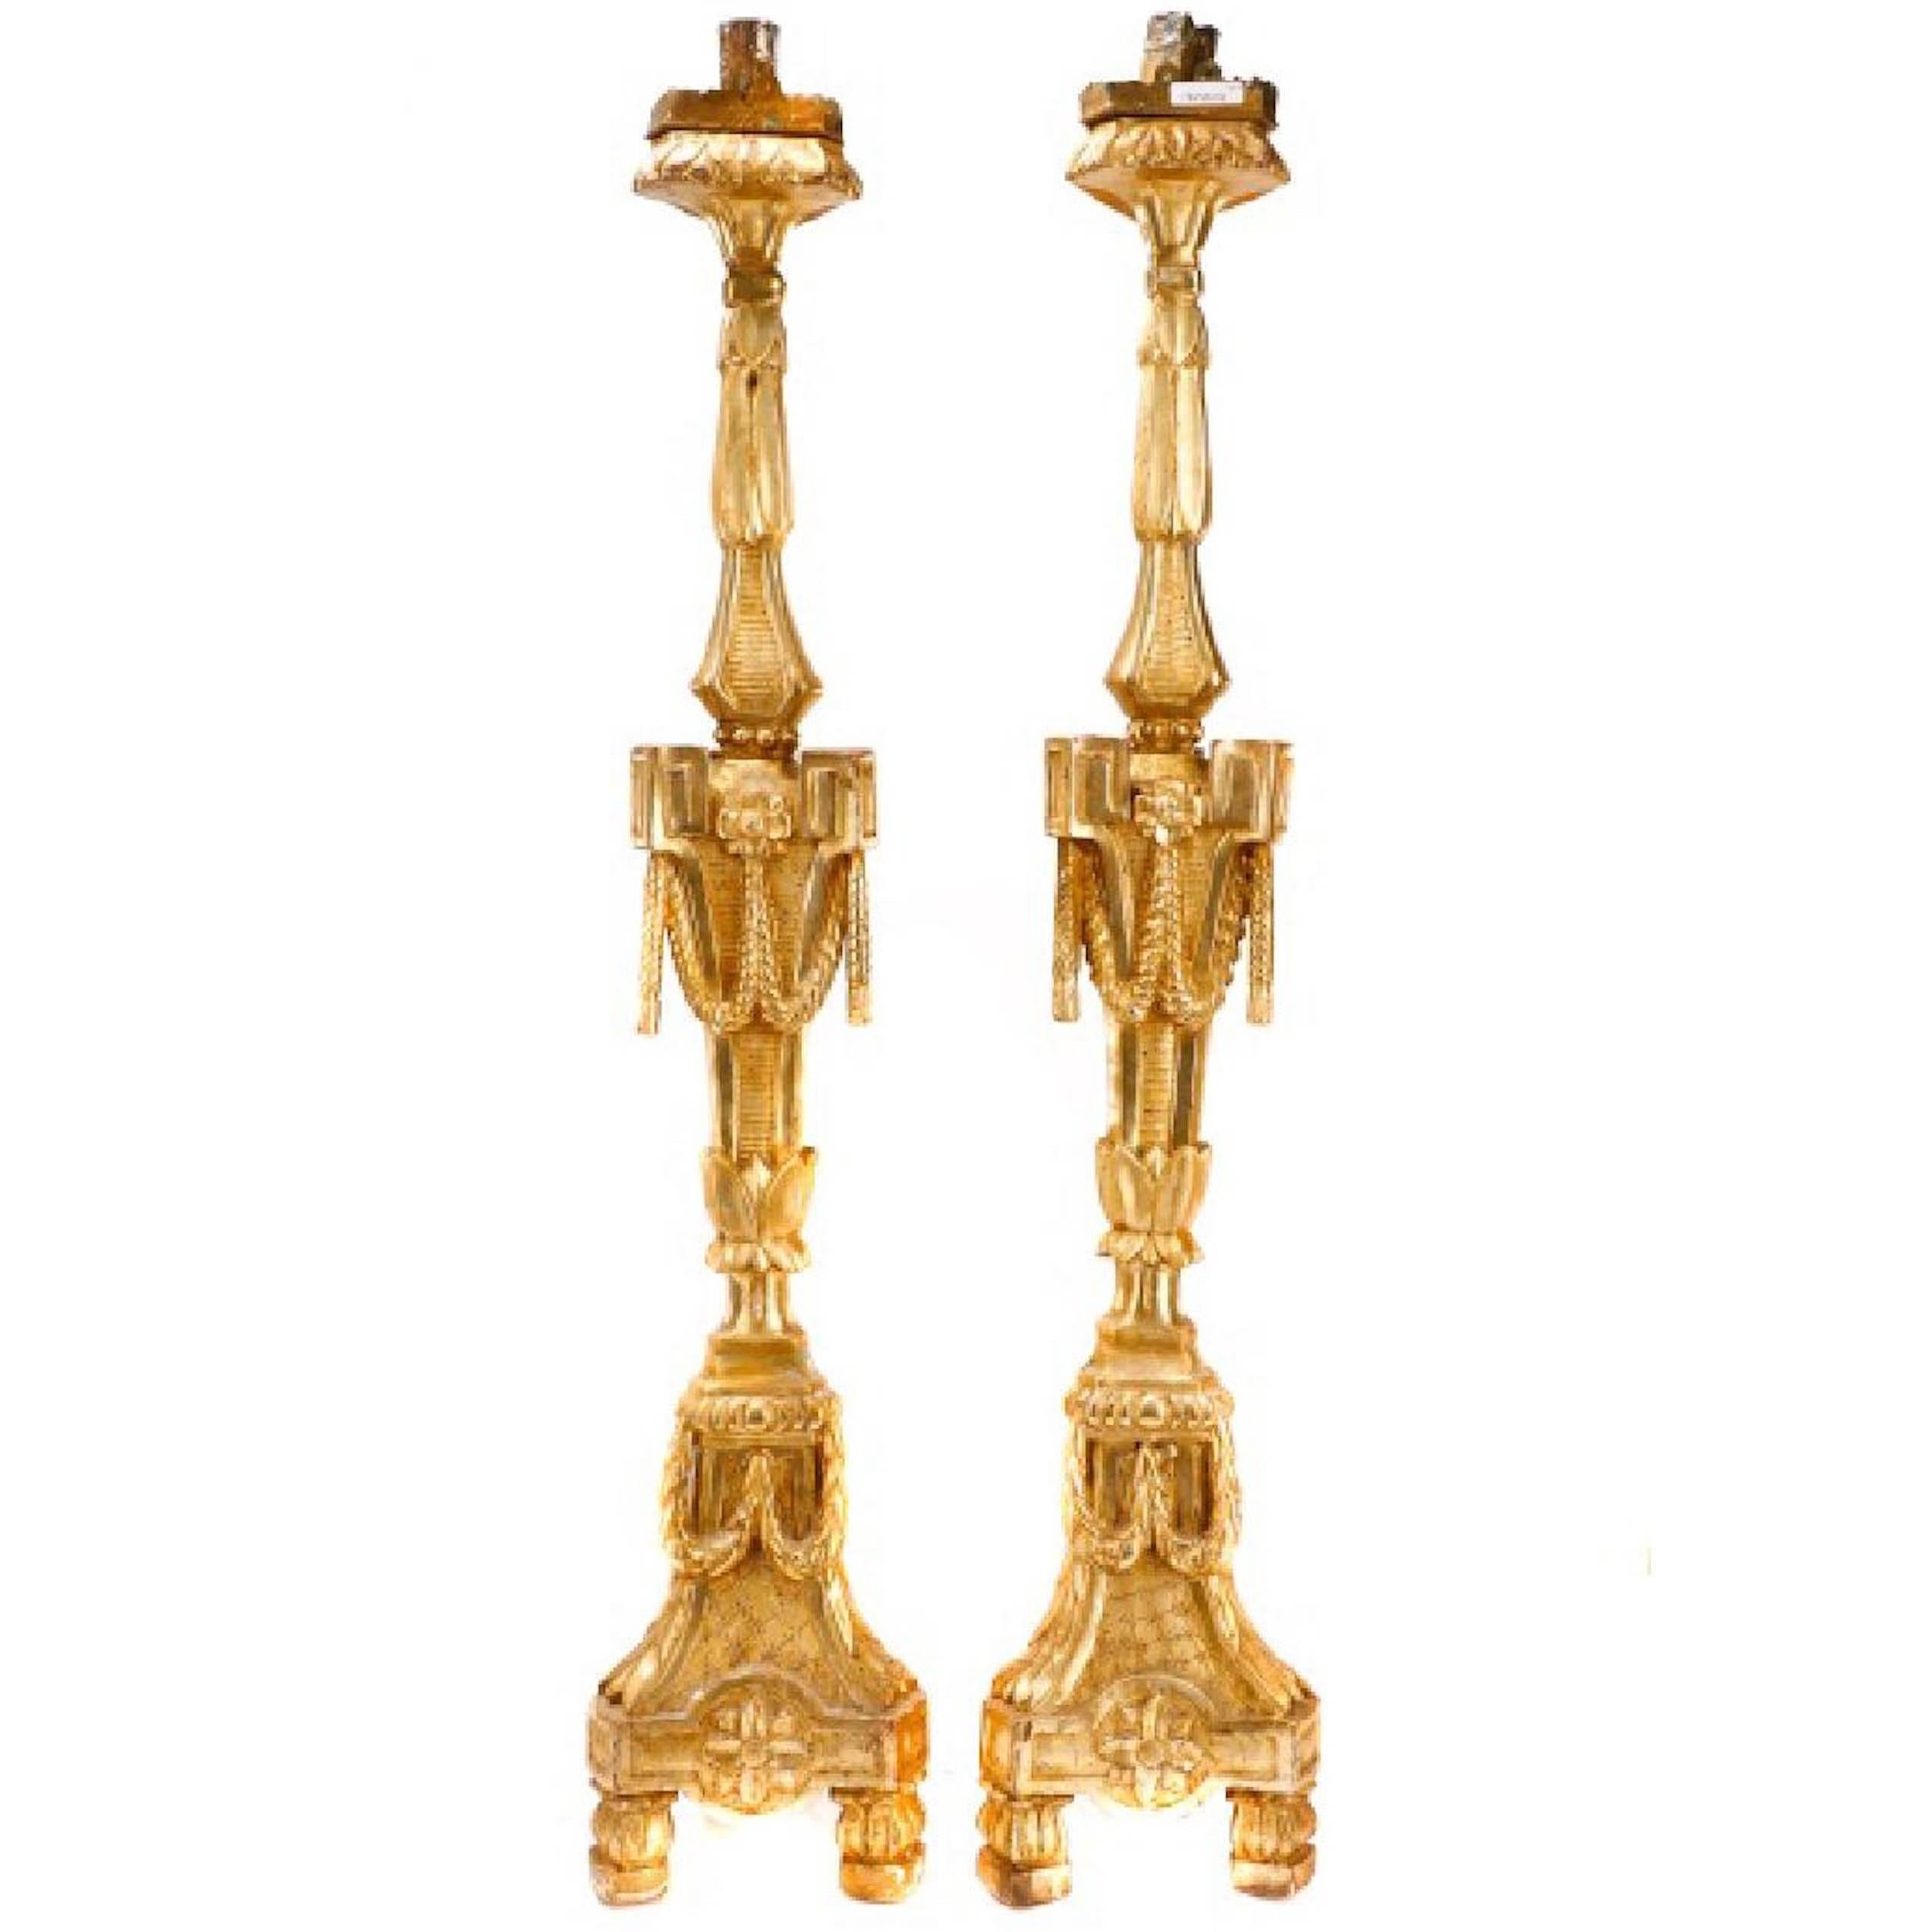 Pair of Antique Italian Silver Gilt Pricket Candlesticks For Sale